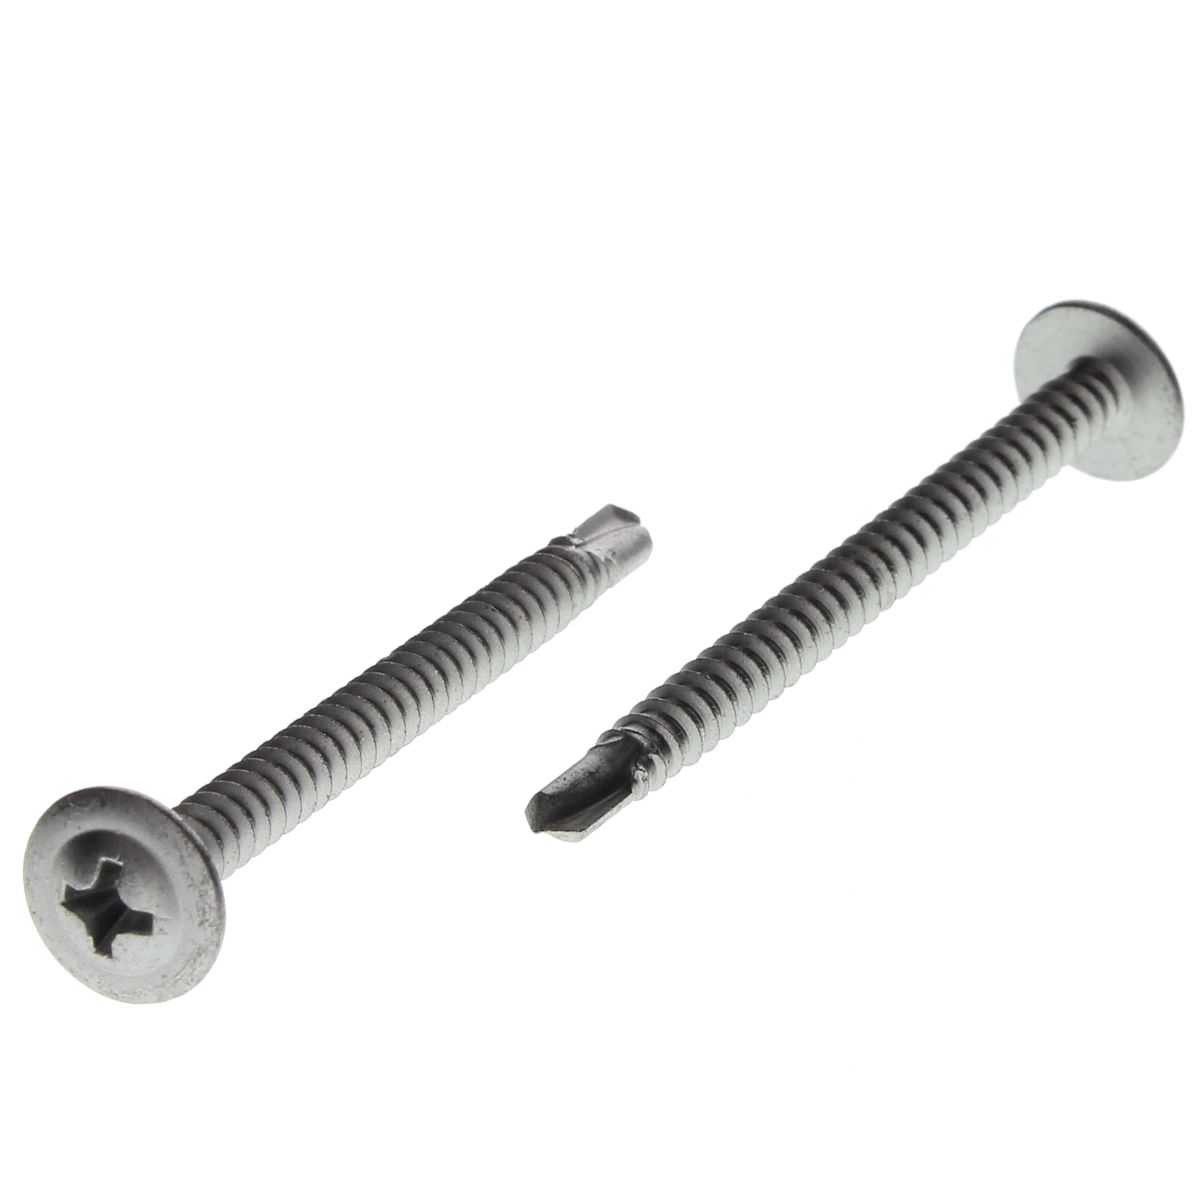 #8-18 x 3/4" Round Washer Hd Phillips Self-Drilling Screws 410 Stainless Steel Type 2 Point 100/PKG